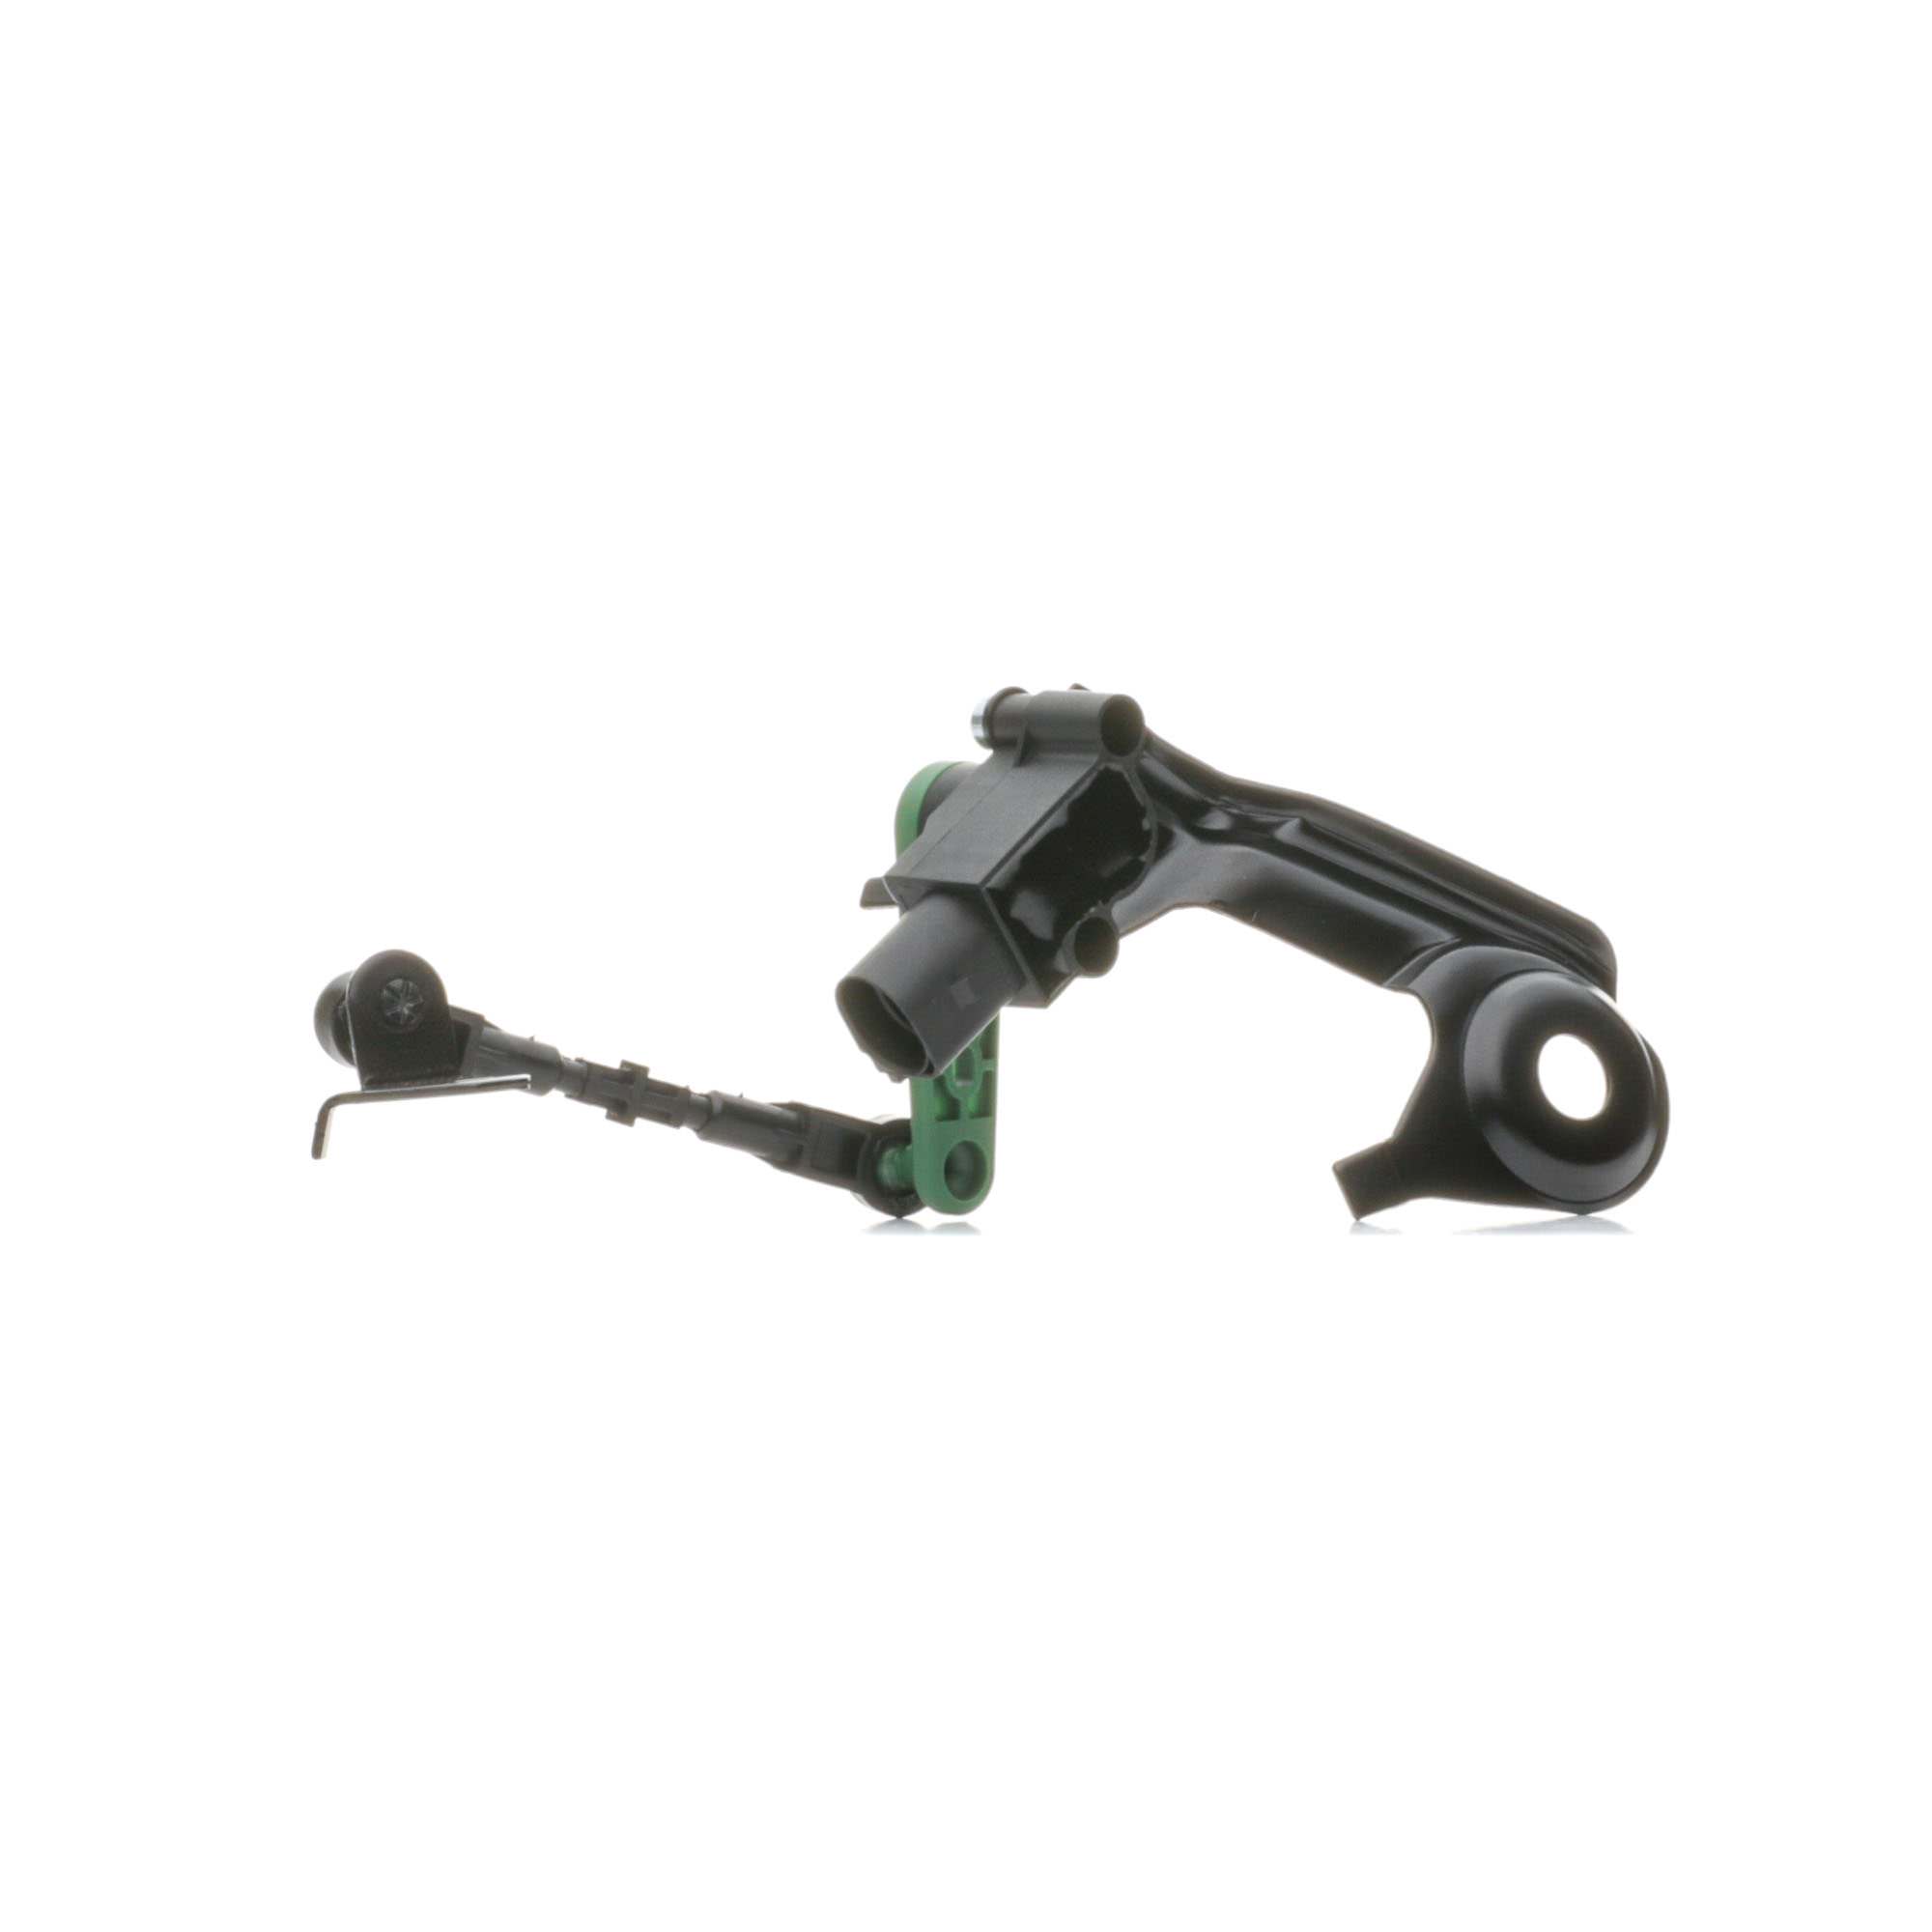 Control headlight range adjustment RIDEX Rear Axle Left, with holder, with coupling rod - 3721S0035